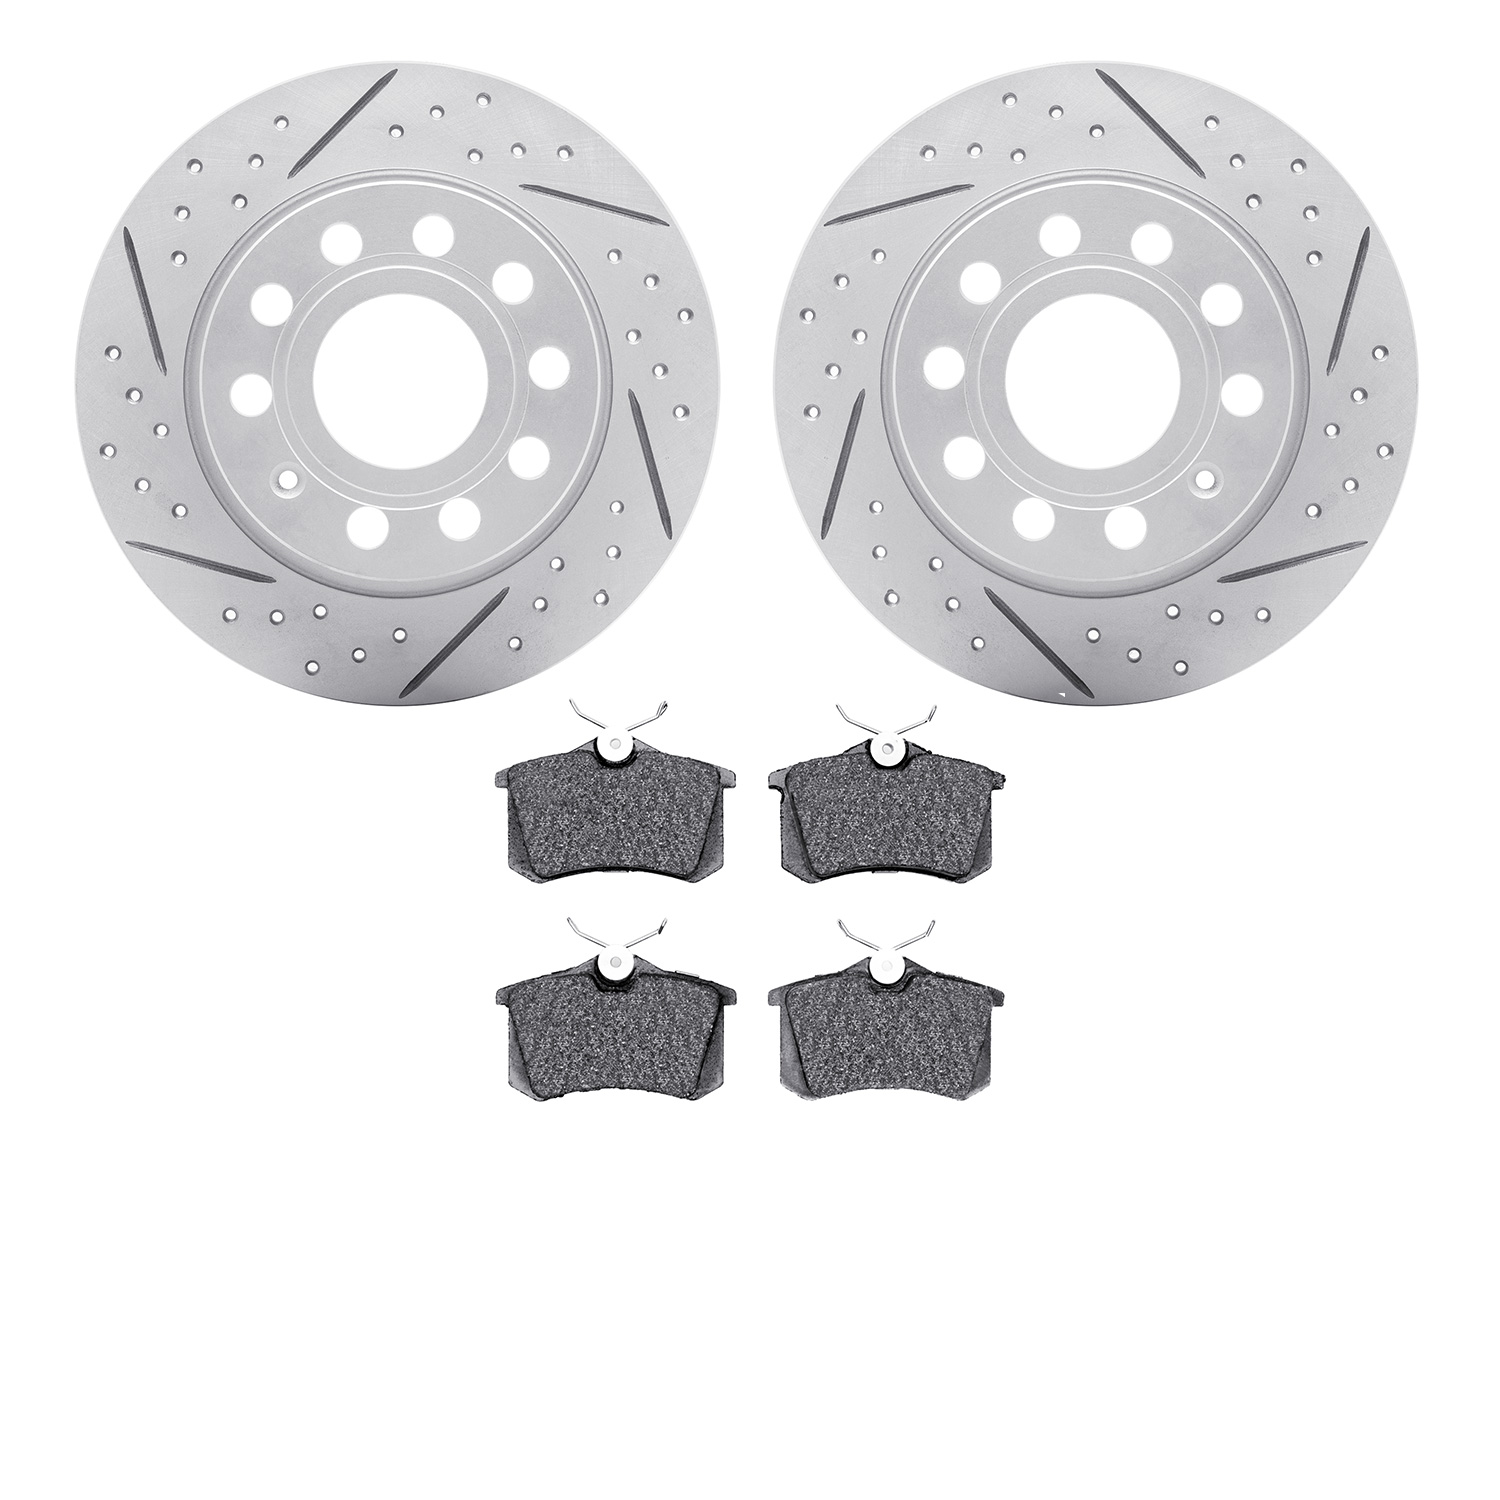 2502-74053 Geoperformance Drilled/Slotted Rotors w/5000 Advanced Brake Pads Kit, 2012-2019 Audi/Volkswagen, Position: Rear